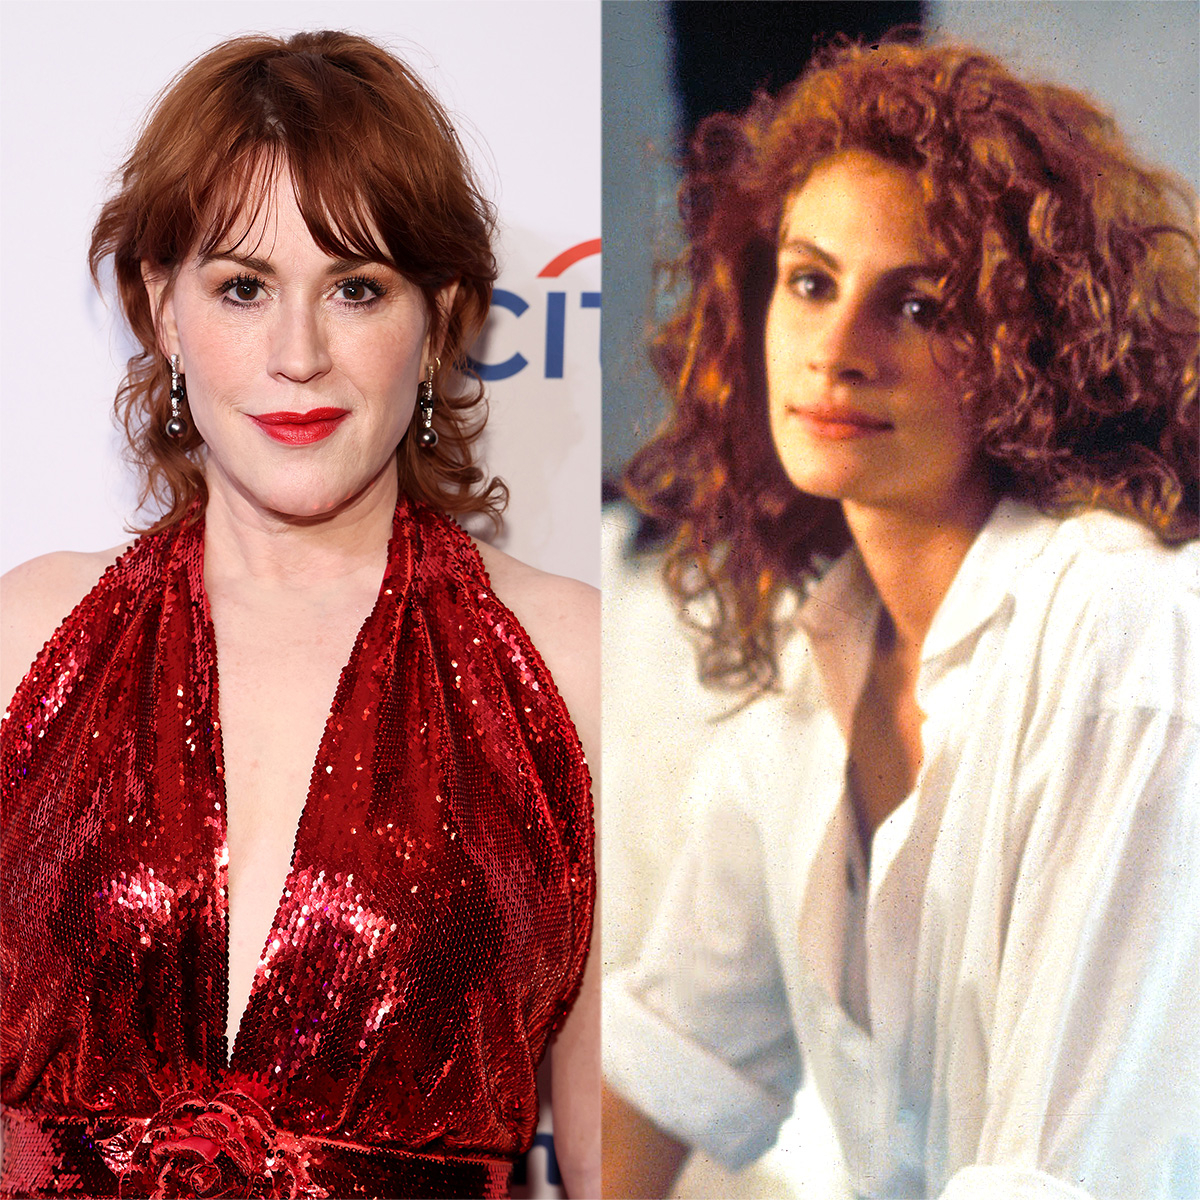 https://akns-images.eonline.com/eol_images/Entire_Site/2023329/rs_1200x1200-230429131942-1200.molly-ringwald-julia-roberts-pretty-woman-2.jpg?fit=around%7C1200:1200&output-quality=90&crop=1200:1200;center,top